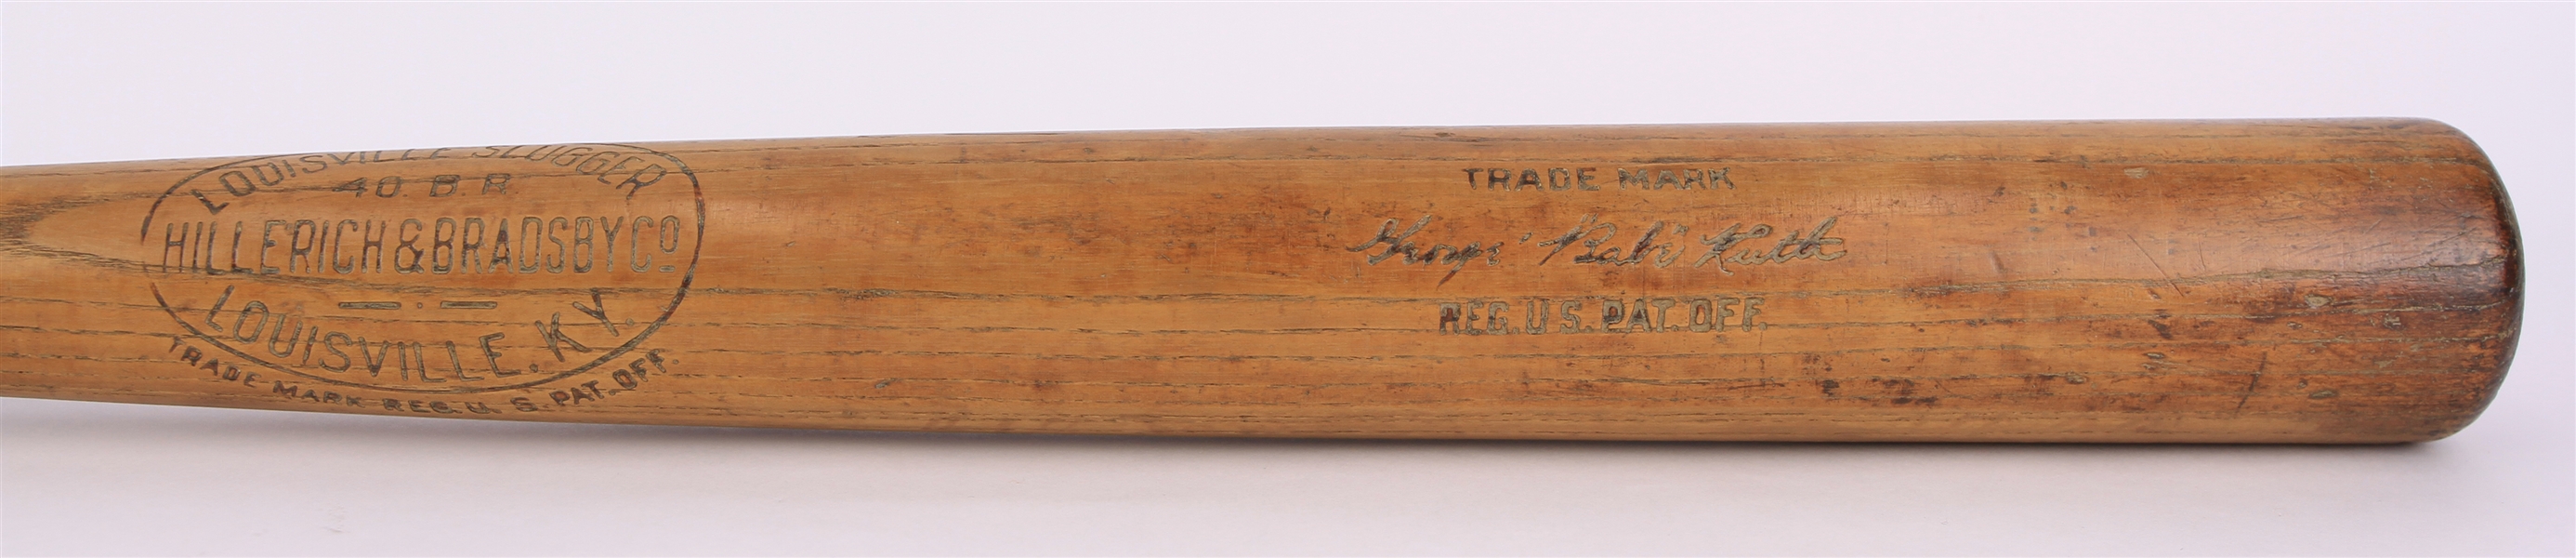 1918-22 George "Babe" Ruth Red Sox/Yankees H&B Louisville Slugger 40BR Sidewritten Store Model Bat "Monstrous 36.5", 40.5 ounce" (Direct from the Vaults of Louisville Slugger & Side Written) 